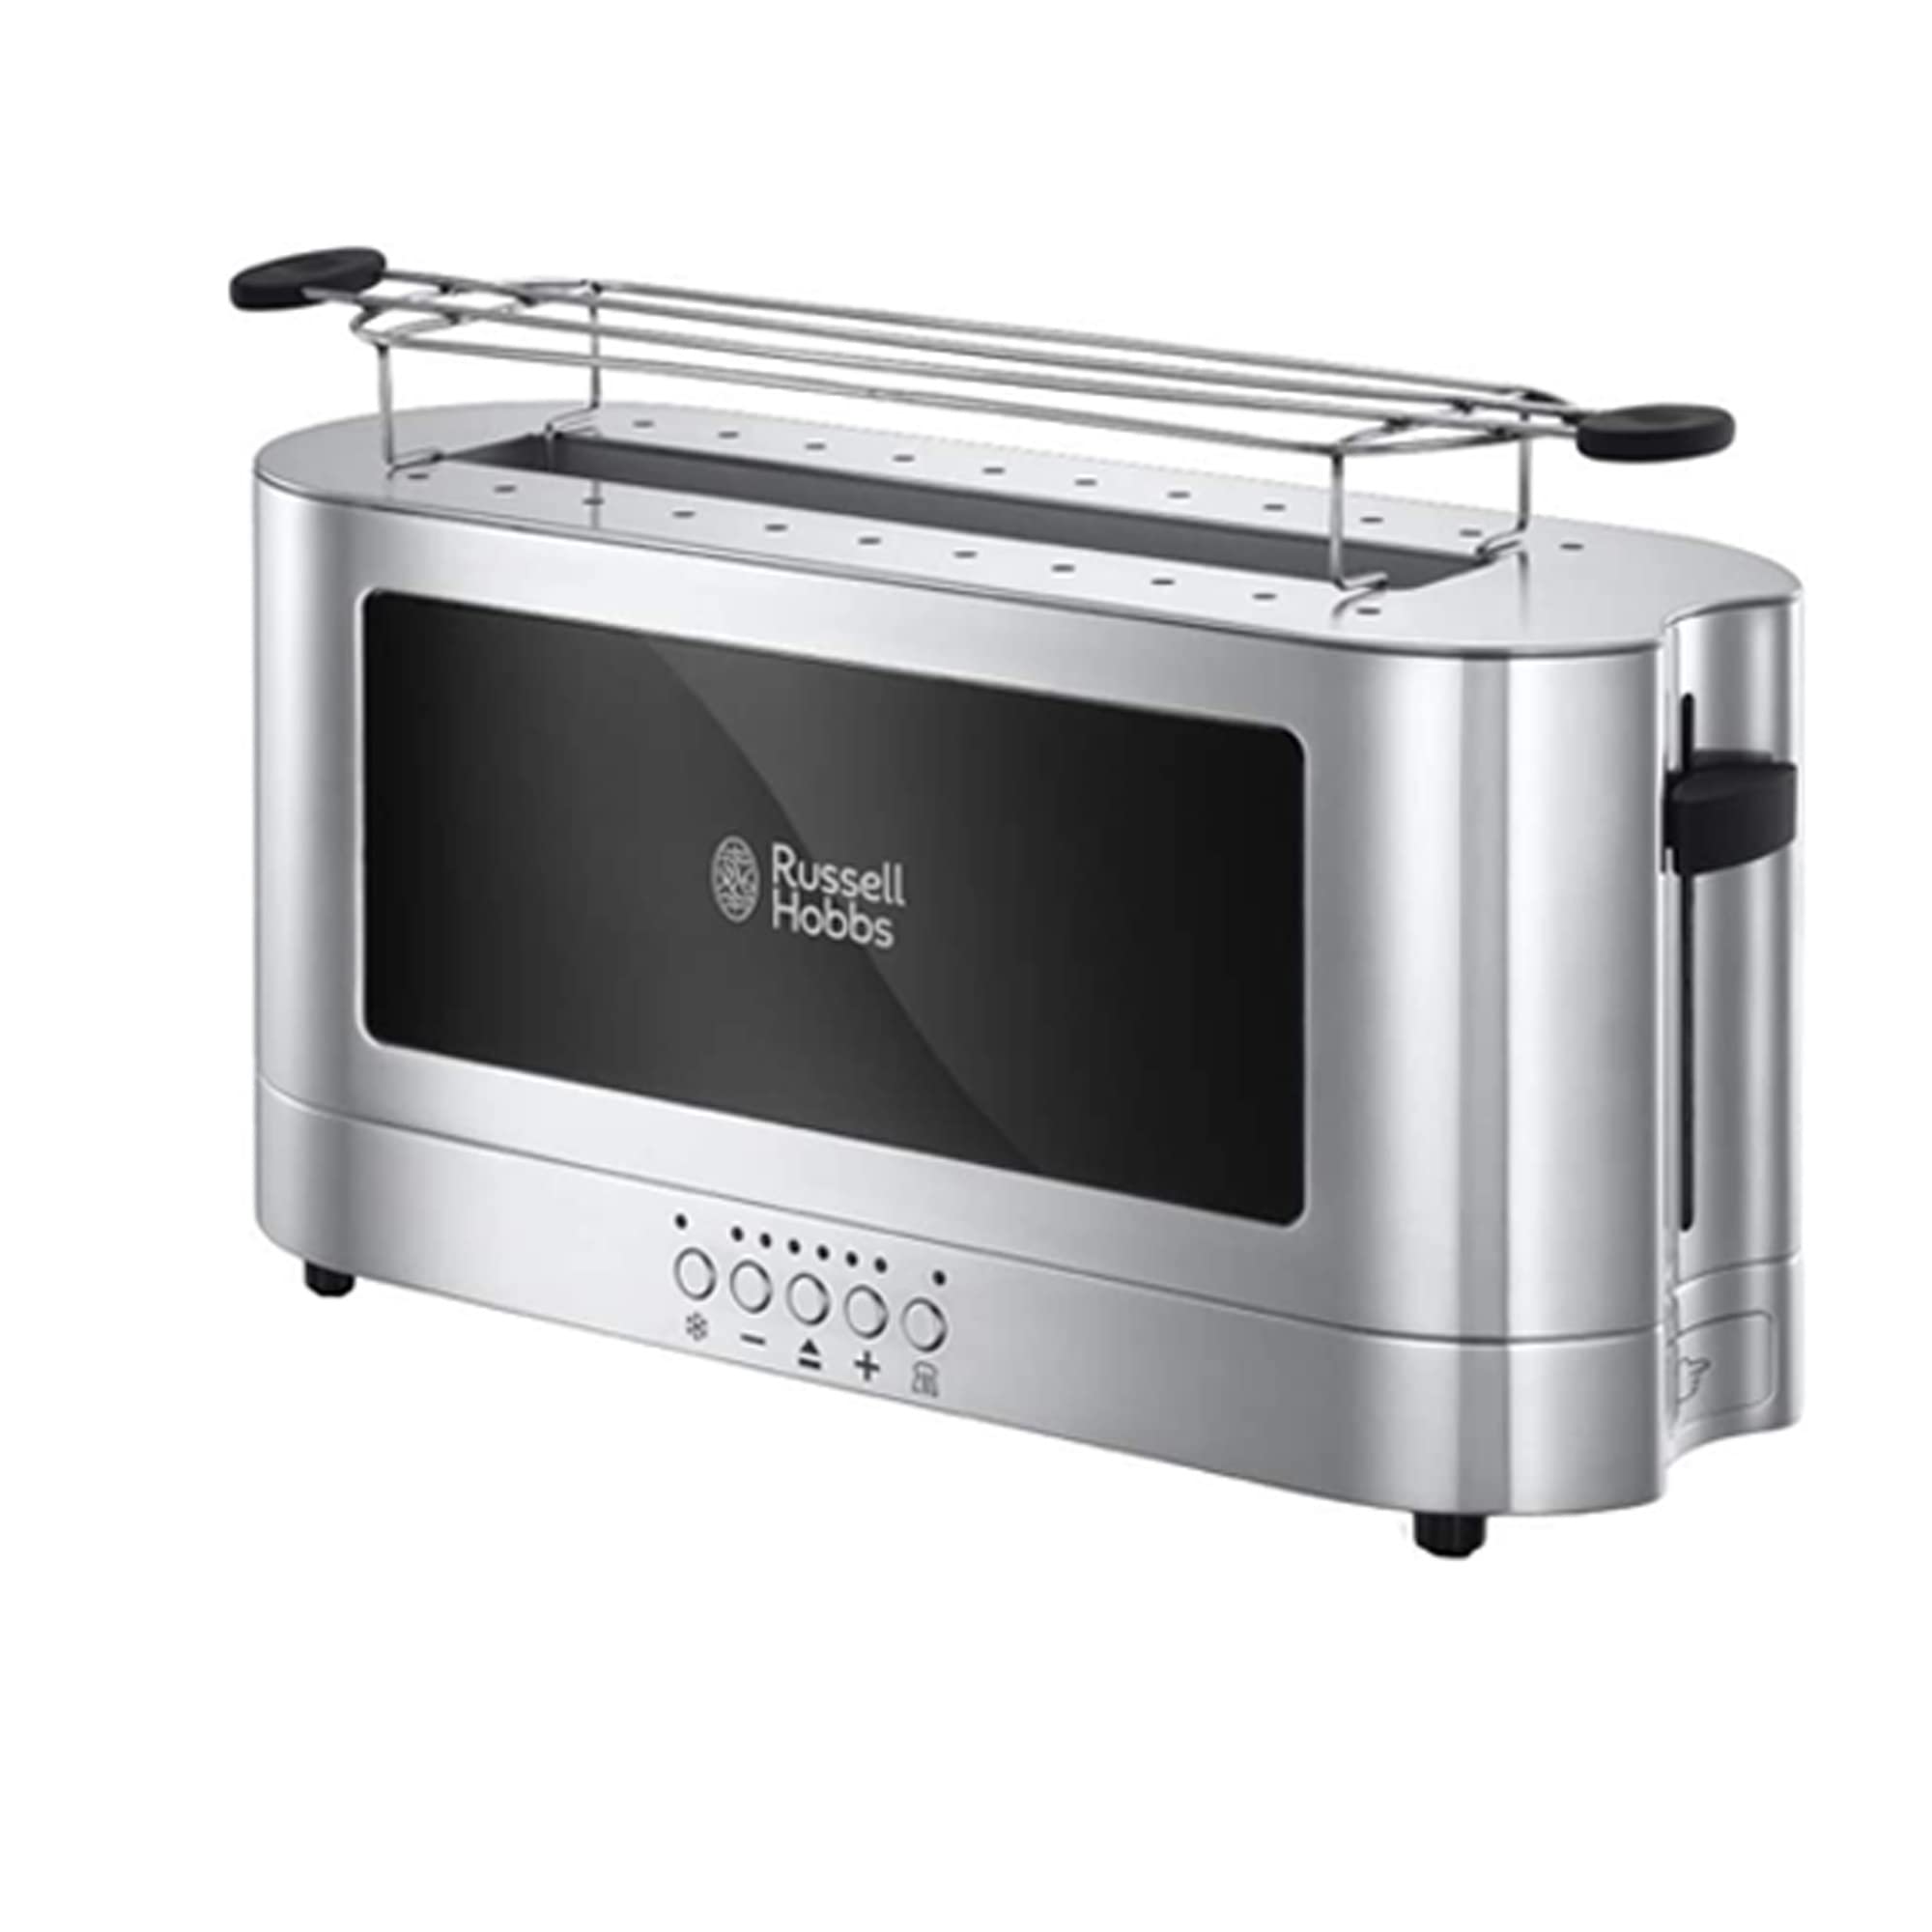 Russell Hobbs 1420W Extra Long Slot Slice Toaster with Toast Technology, Automatic